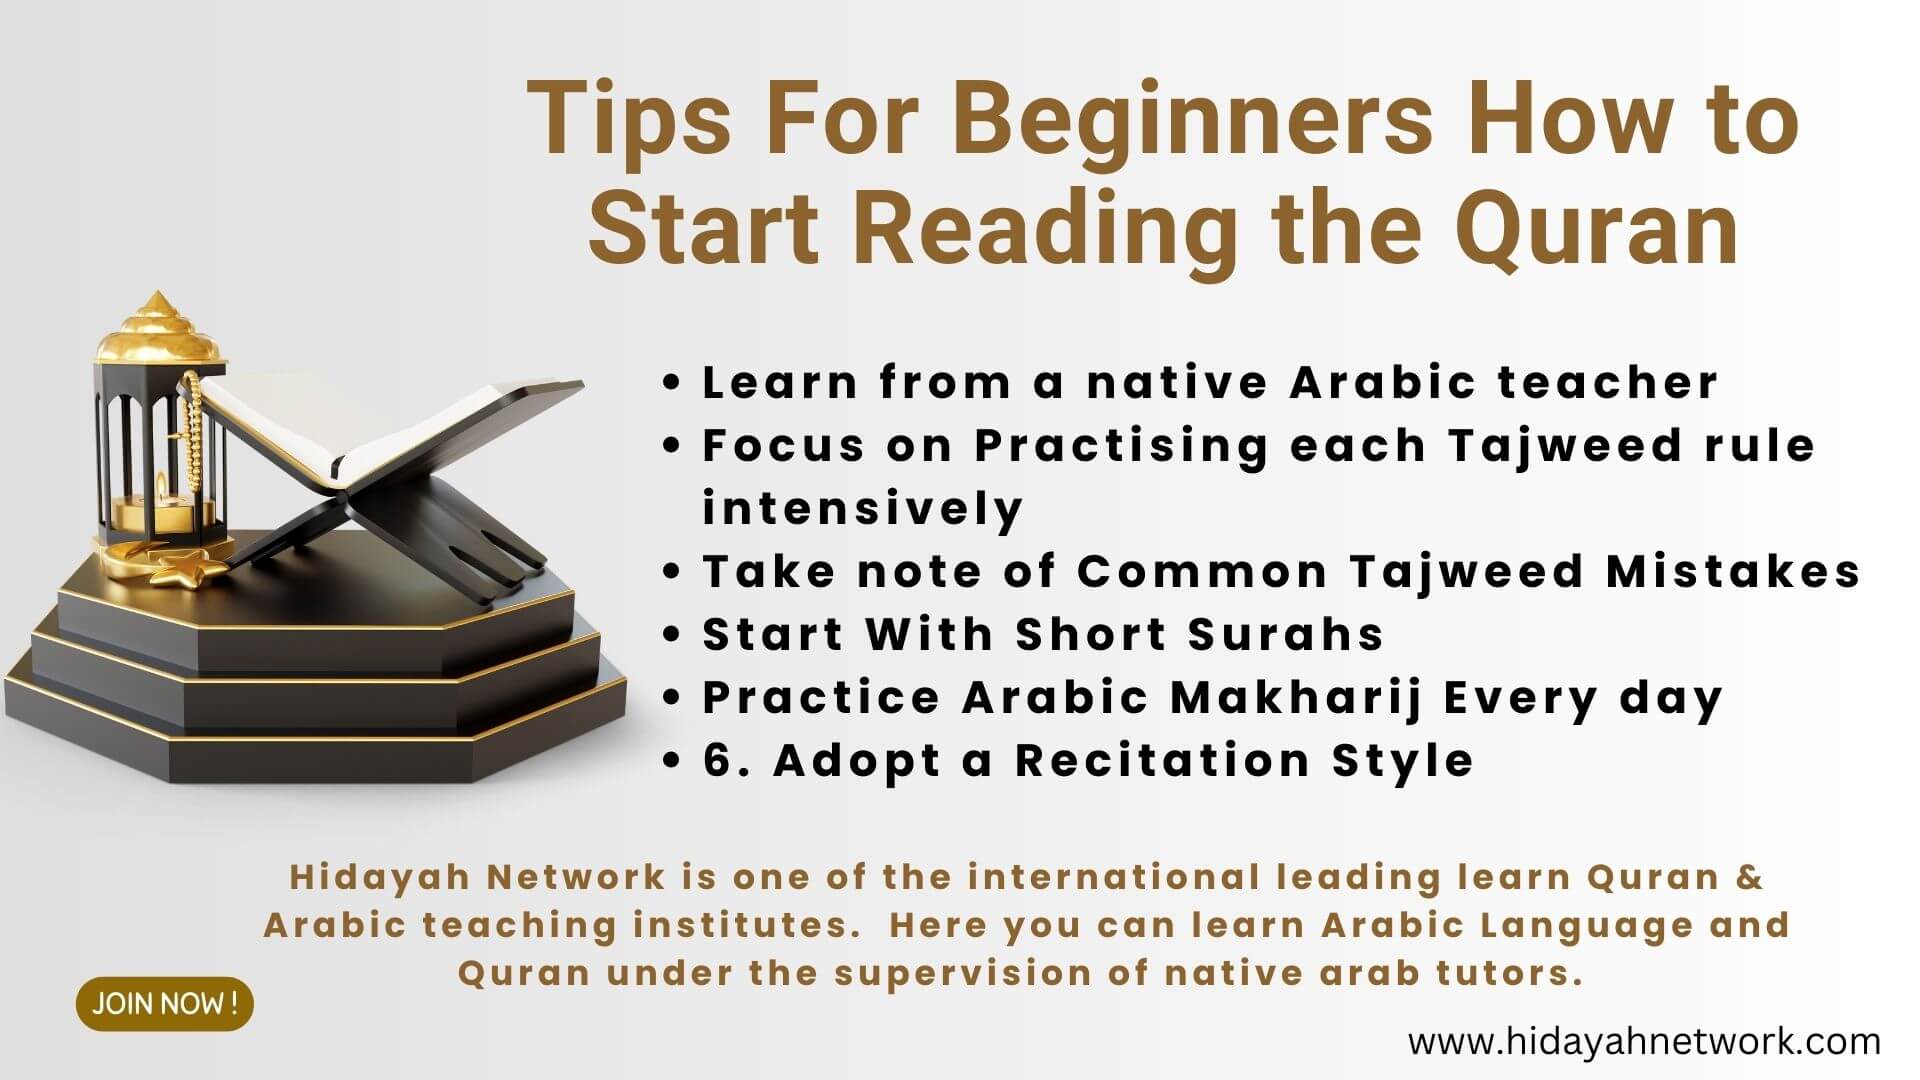 Tips For Beginners How to Start Reading the Quran